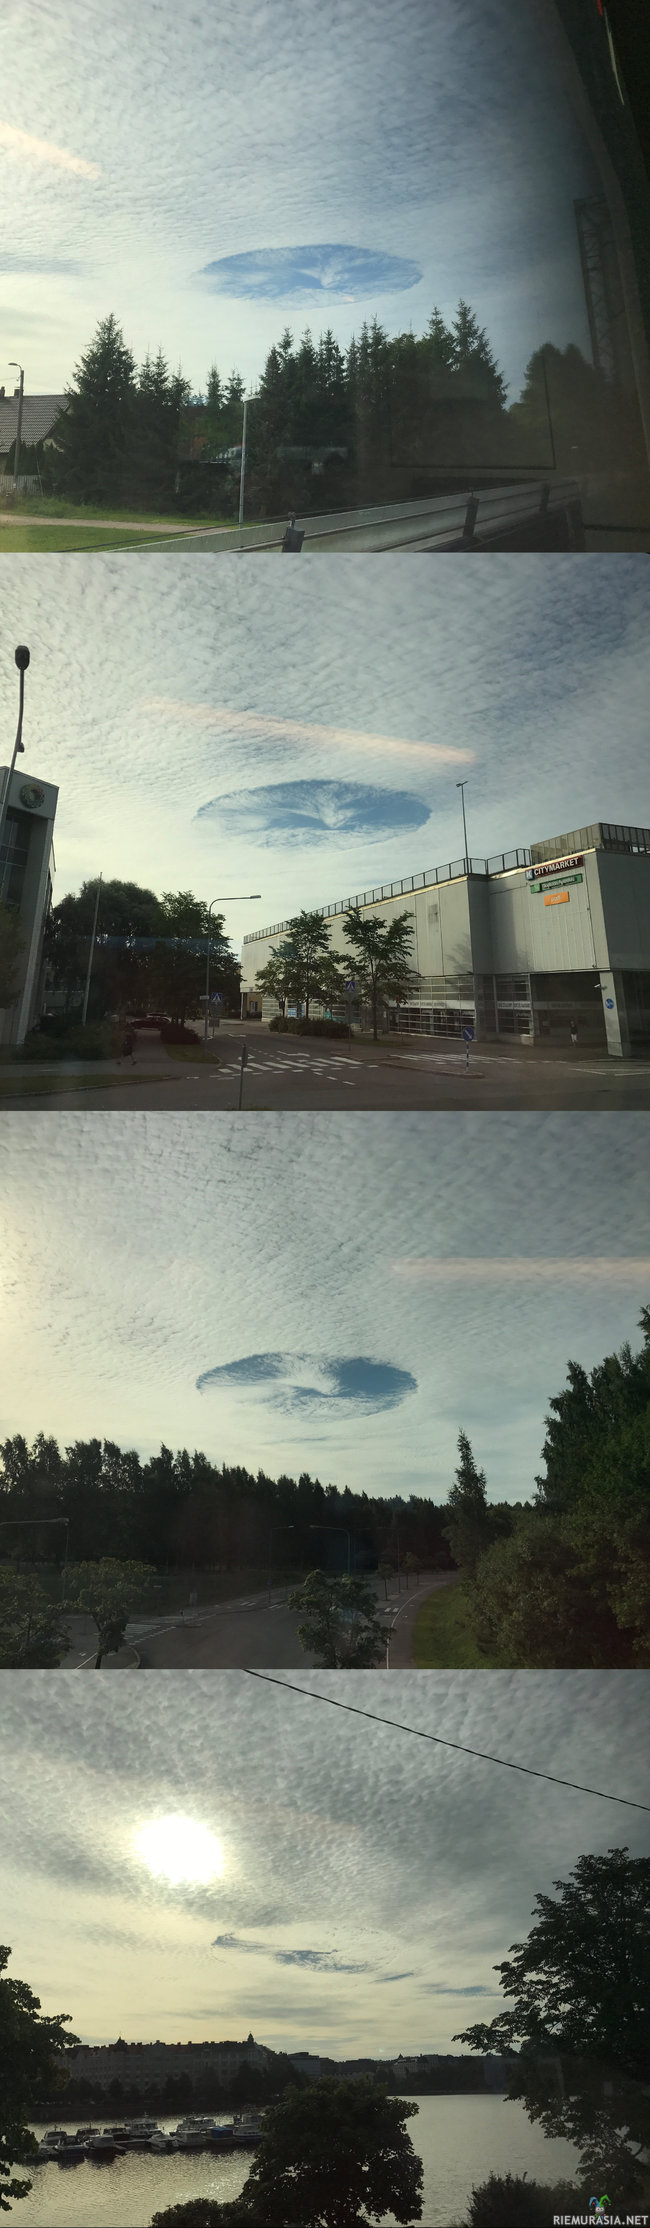 Reikä Taivaassa - Because of their rarity and unusual appearance, fallstreak holes have been mistaken for or attributed to unidentified flying objects. - https://en.wikipedia.org/wiki/Fallstreak_hole.